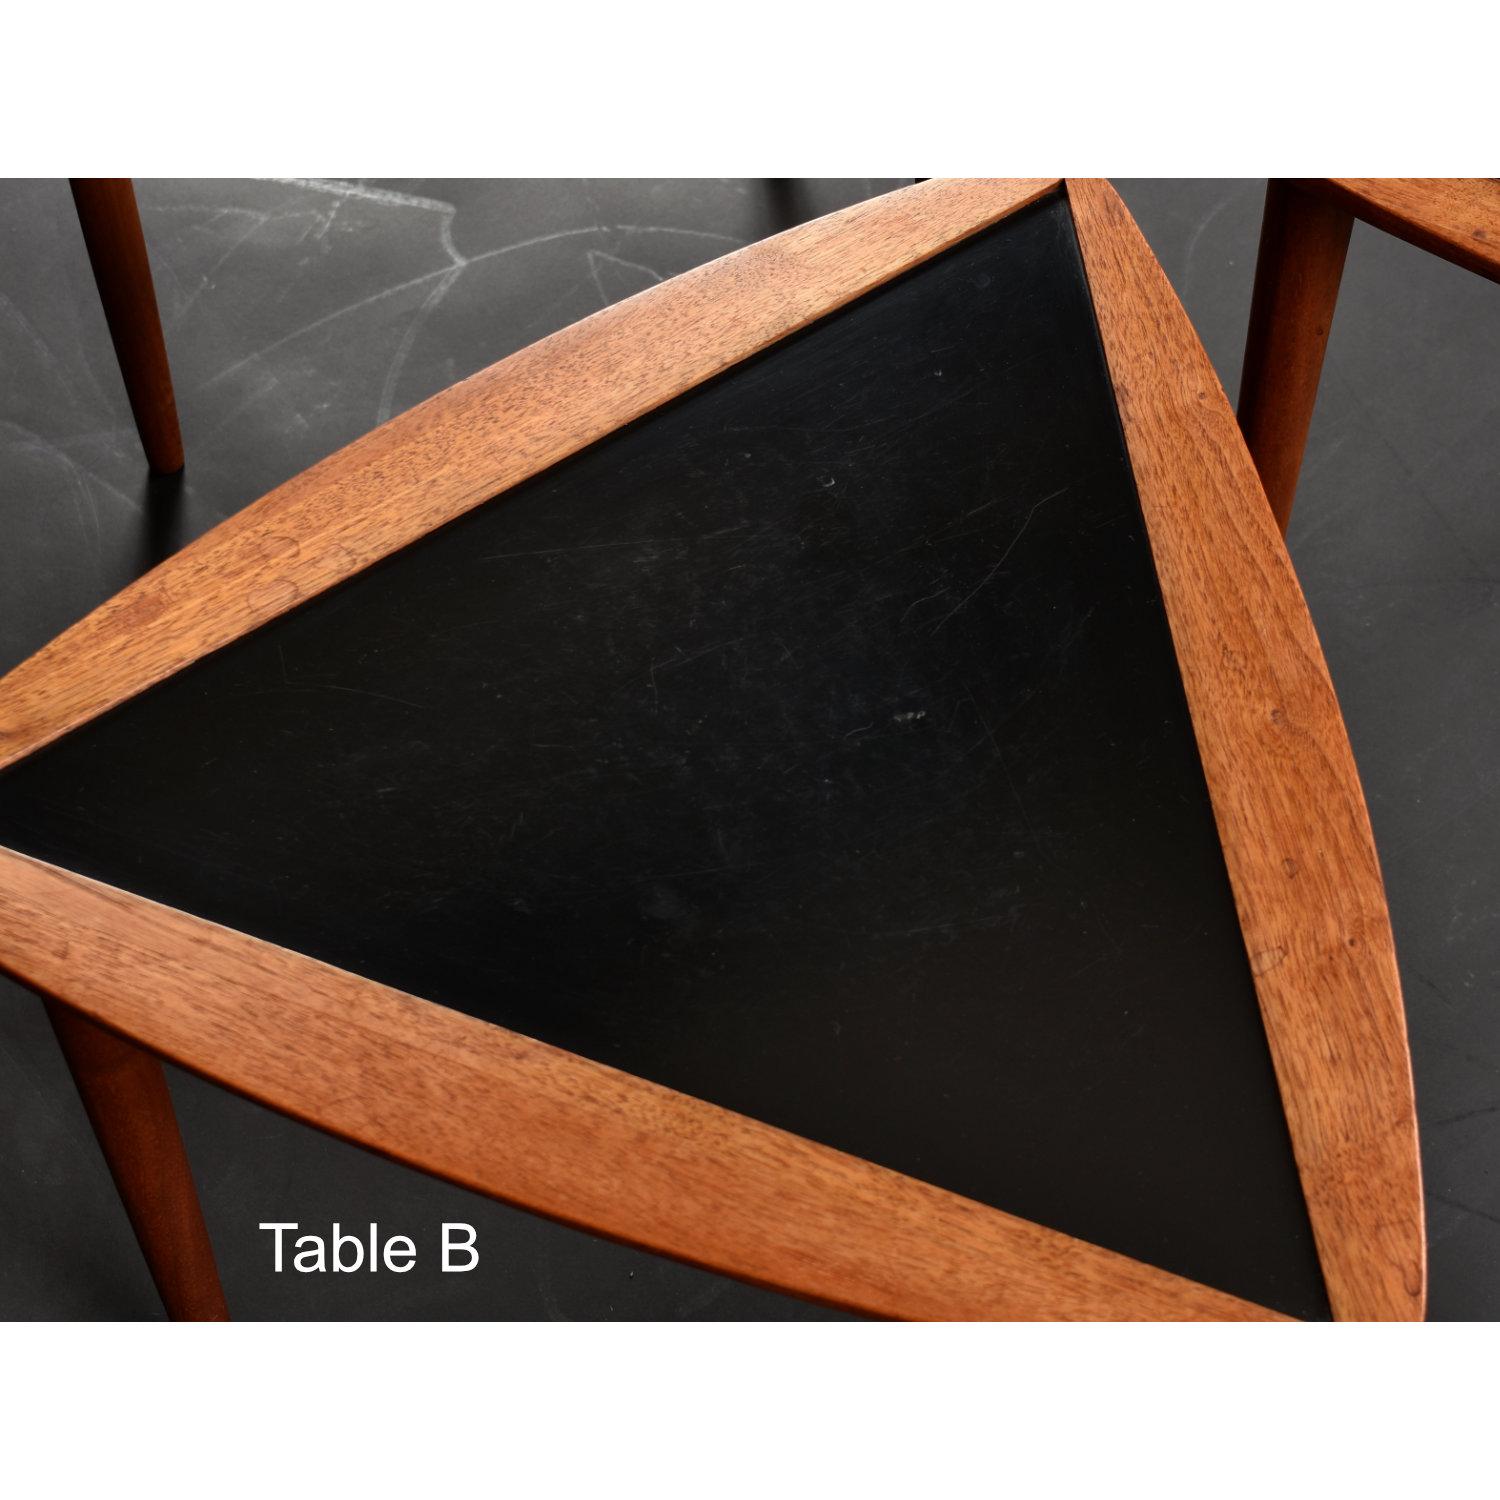 Set of three Mid-Century Modern nesting tables by Arthur Umanoff. The tables are guitar-pick shaped with black laminate tops inset to solid walnut wood frames. The vintage 1950s triangular tables can be used independently. Stack the nesting tables